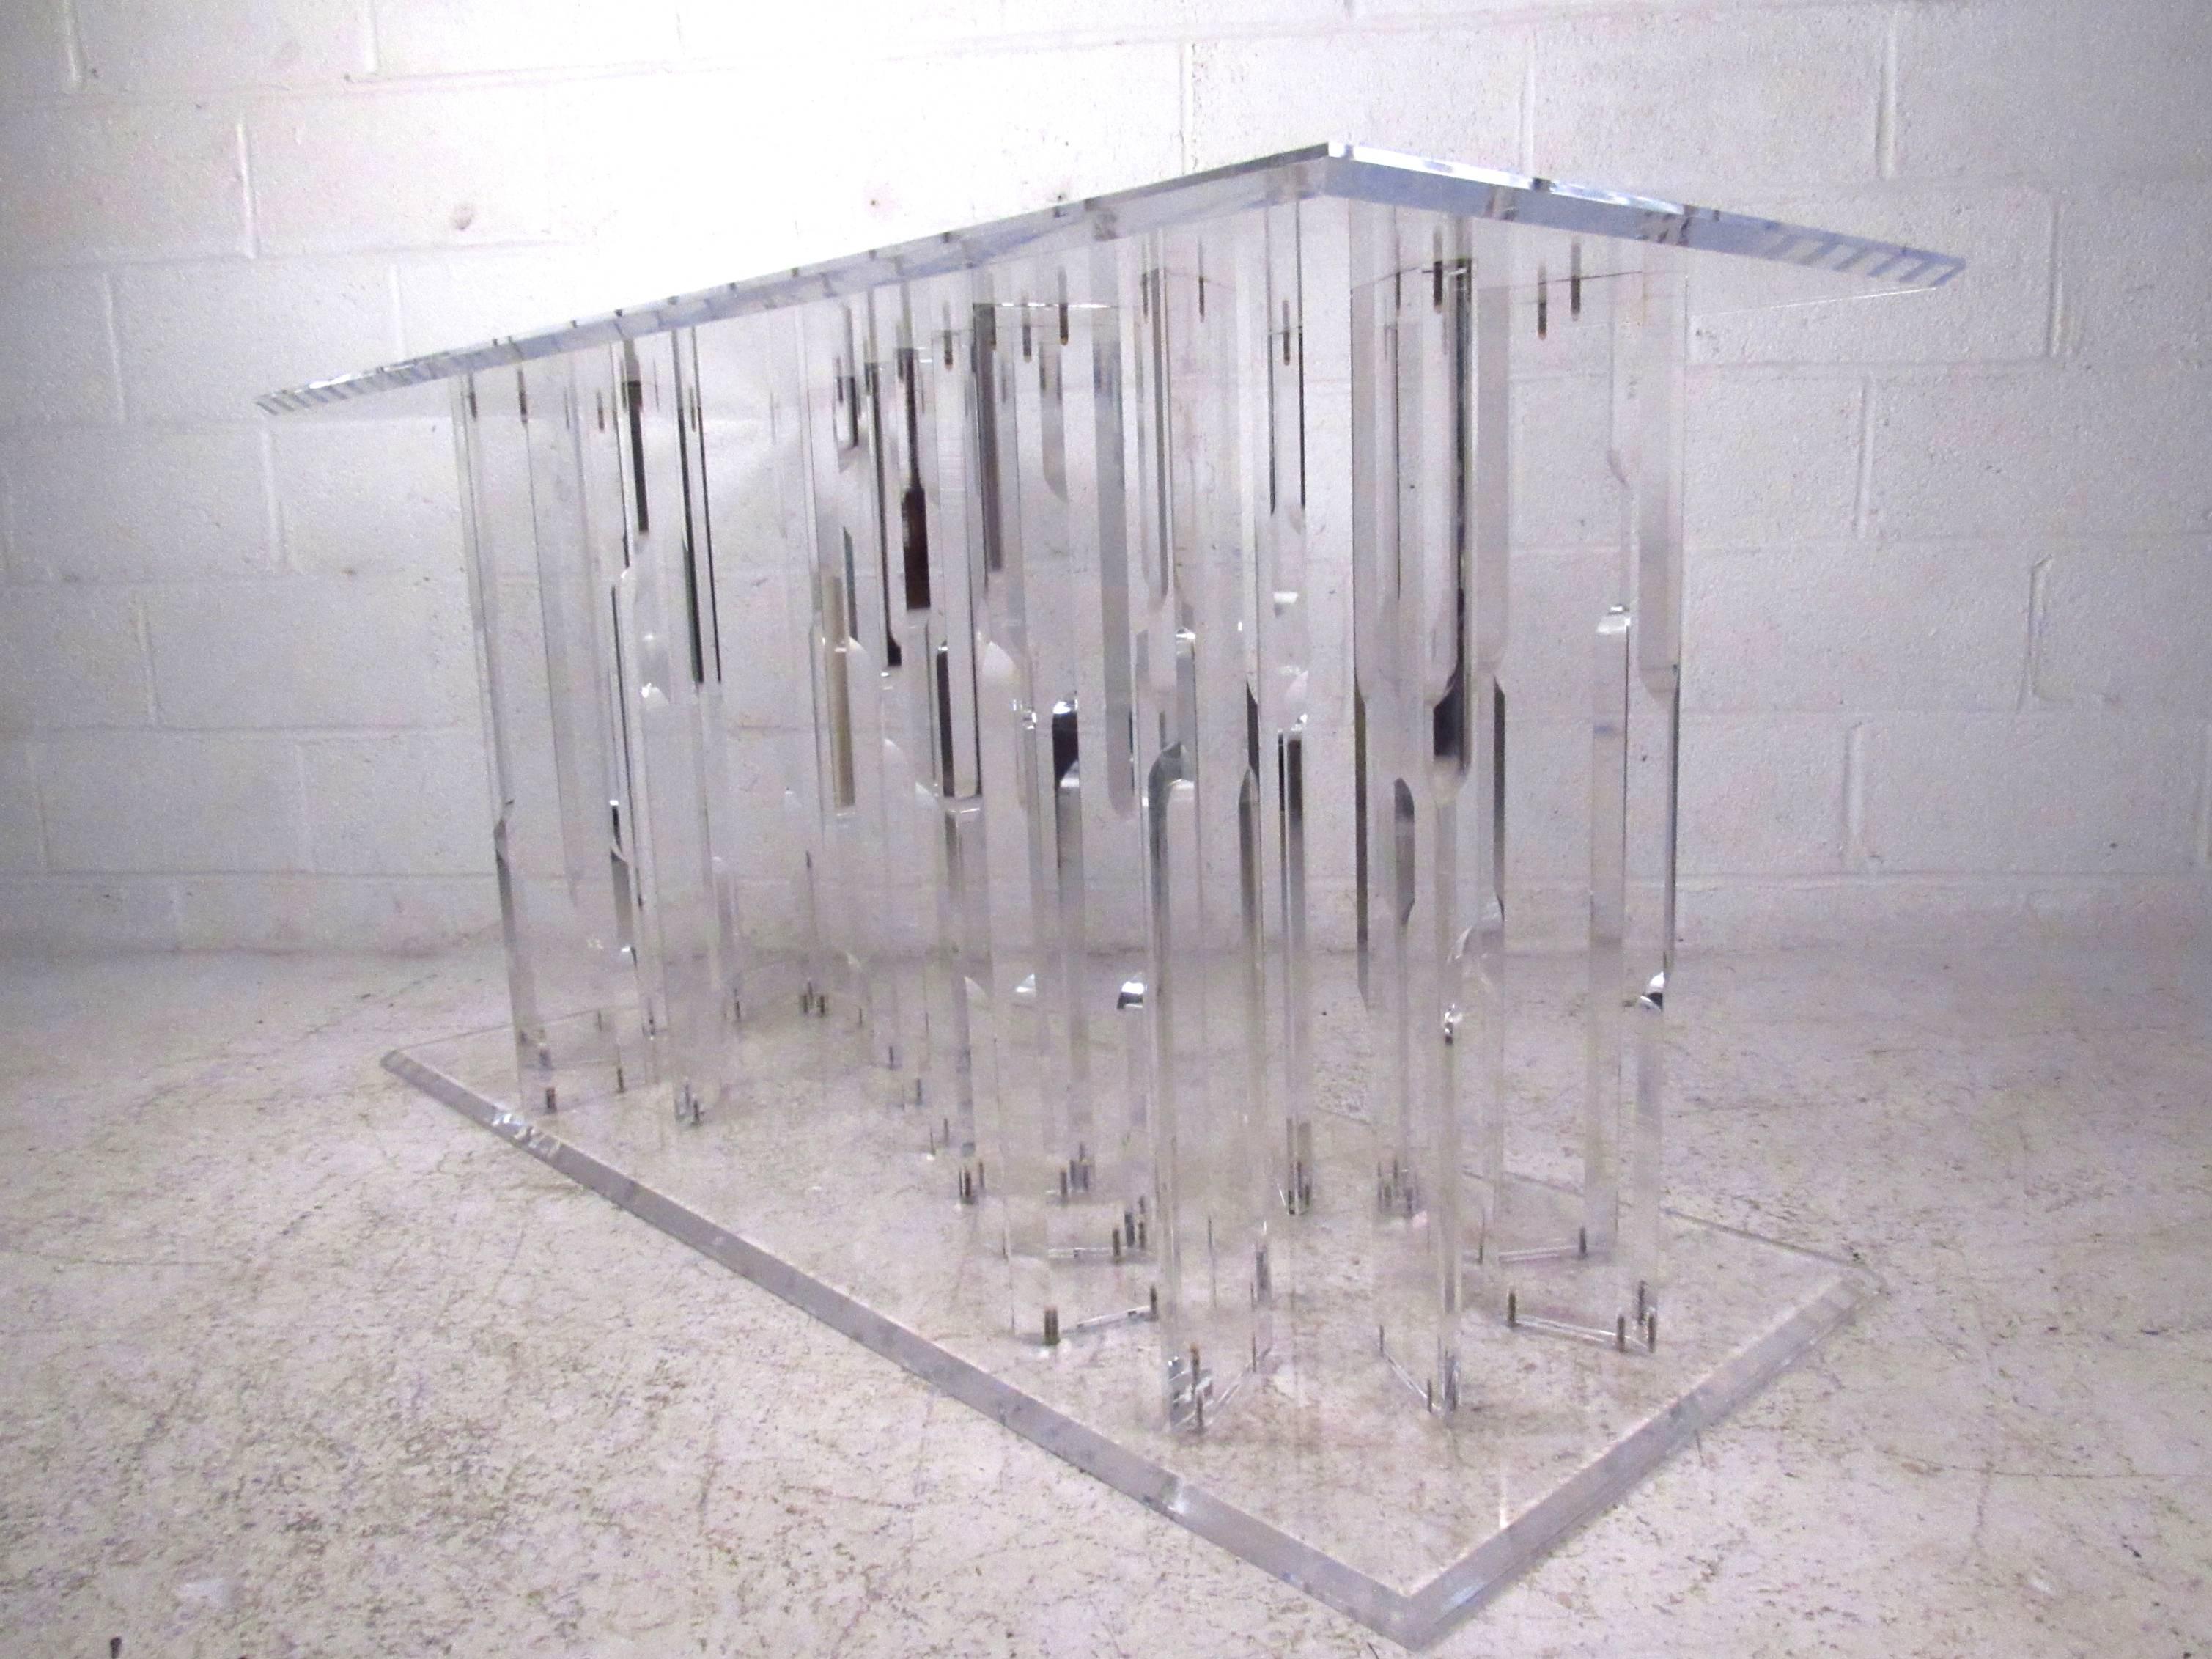 This elegant Lucite table features sculpted Lucite construction with beveled edges, making a wonderful modern addition to any setting. Suited for use as a sofa table, hall table, or centre table it's unique vintage design is perfect for making a